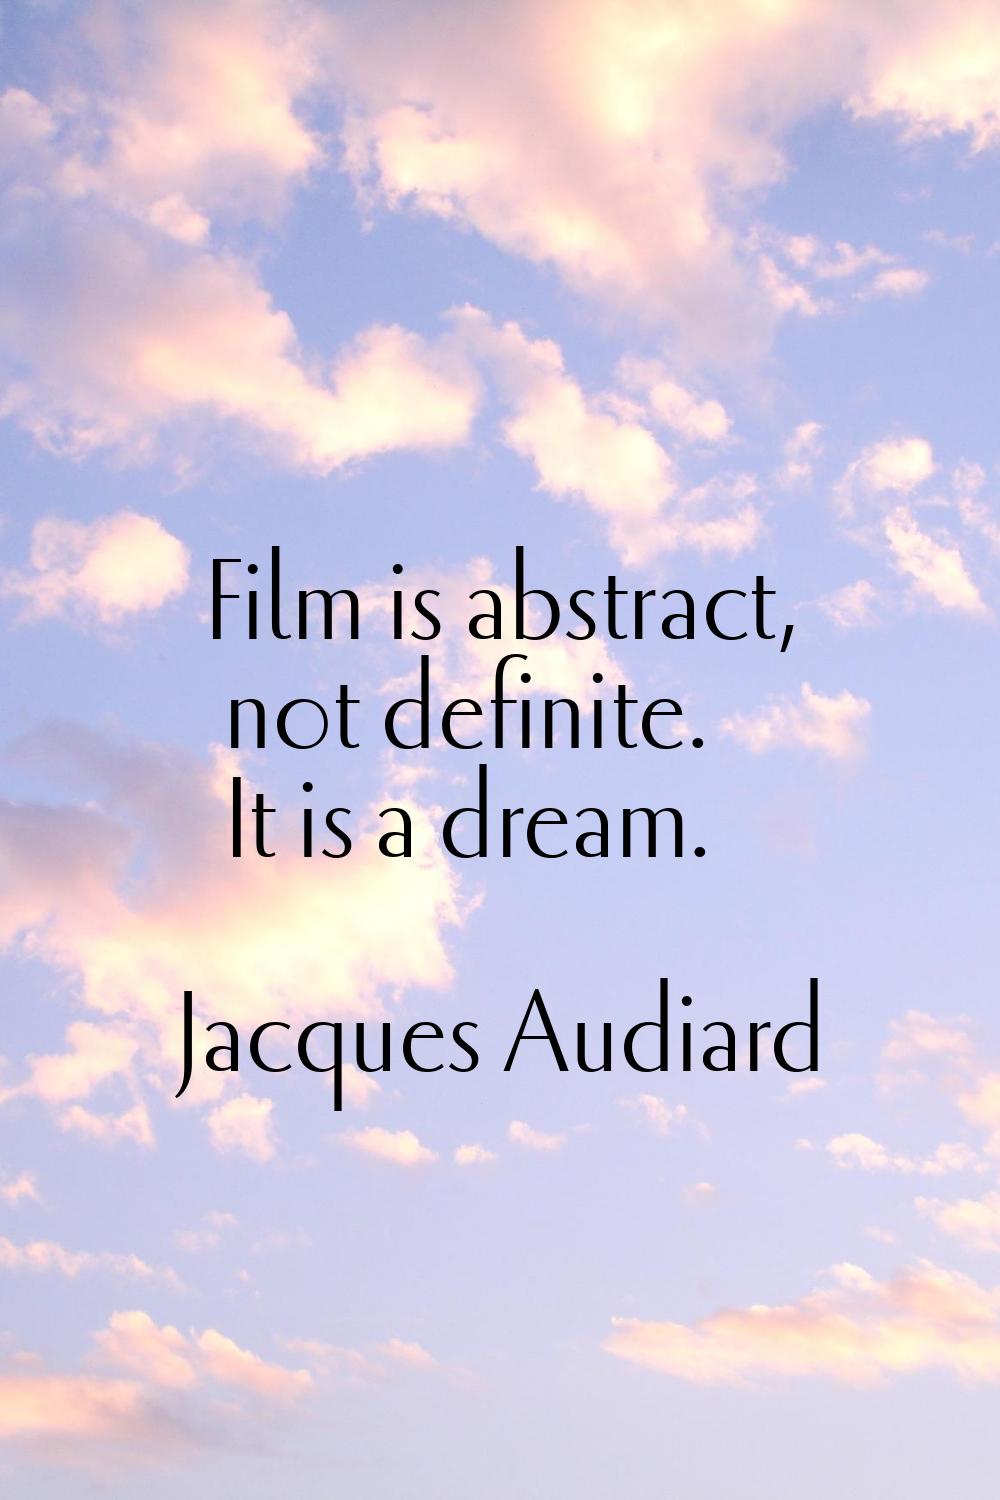 Film is abstract, not definite. It is a dream.